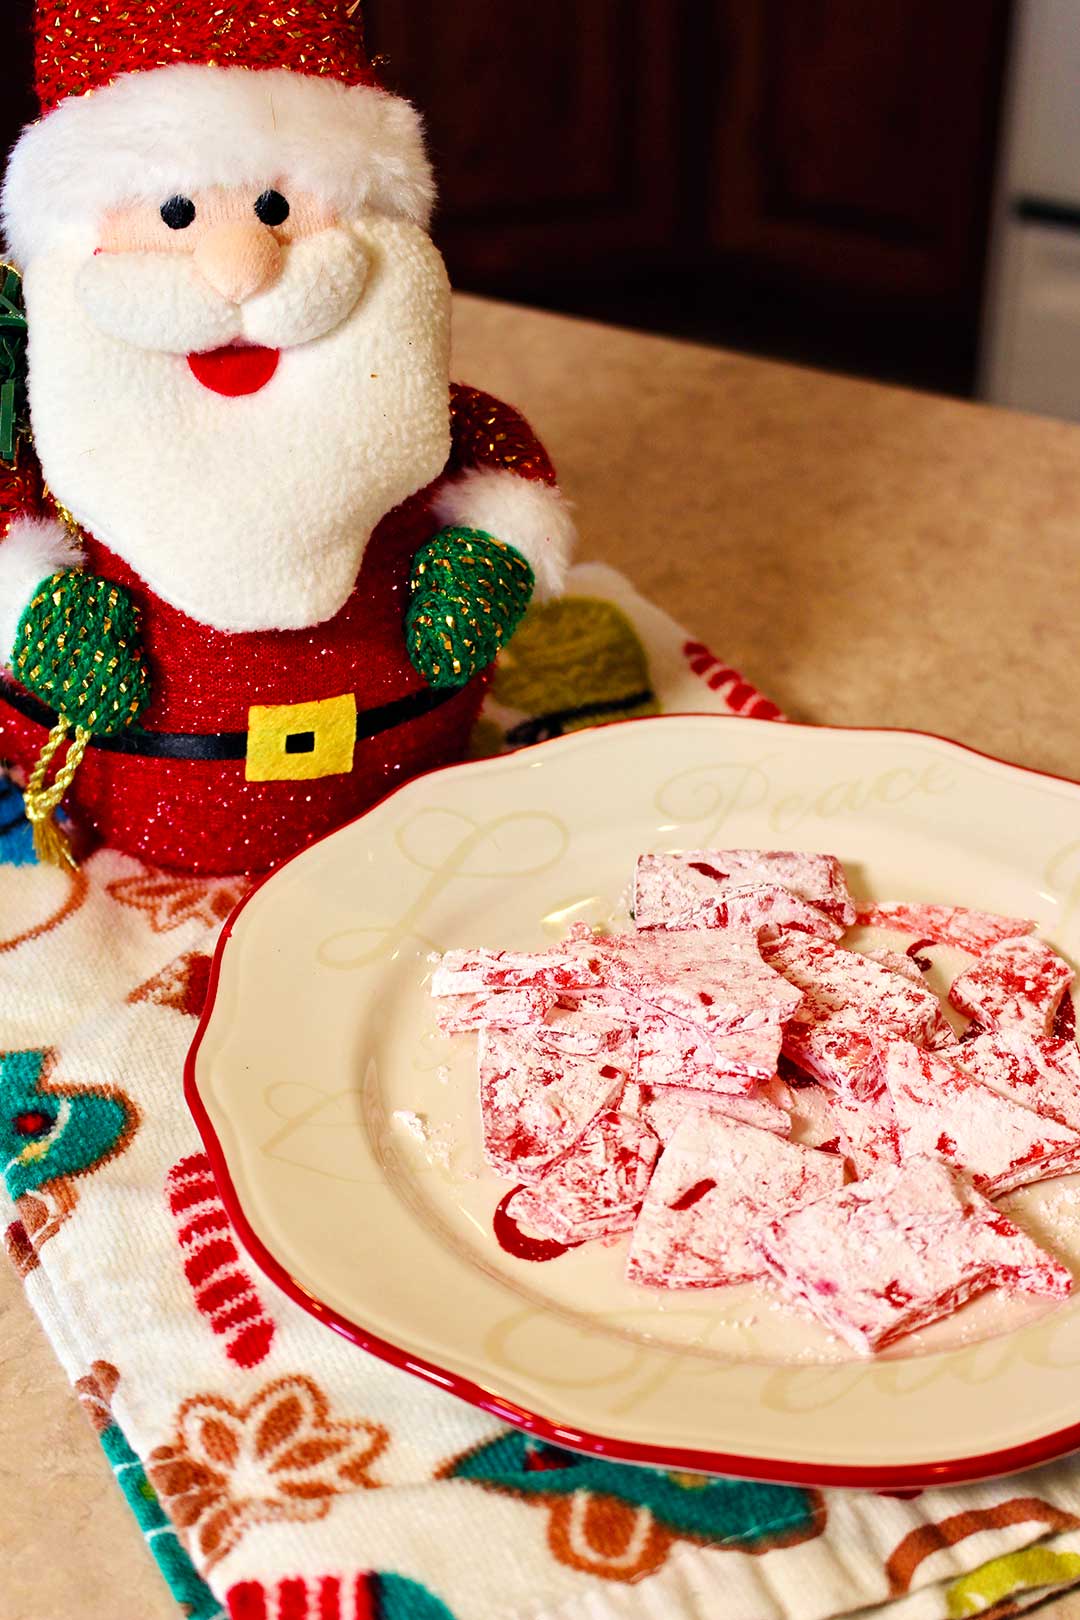 A Santa decoration and plate of cinnamon candies sitting on a festive hand towel